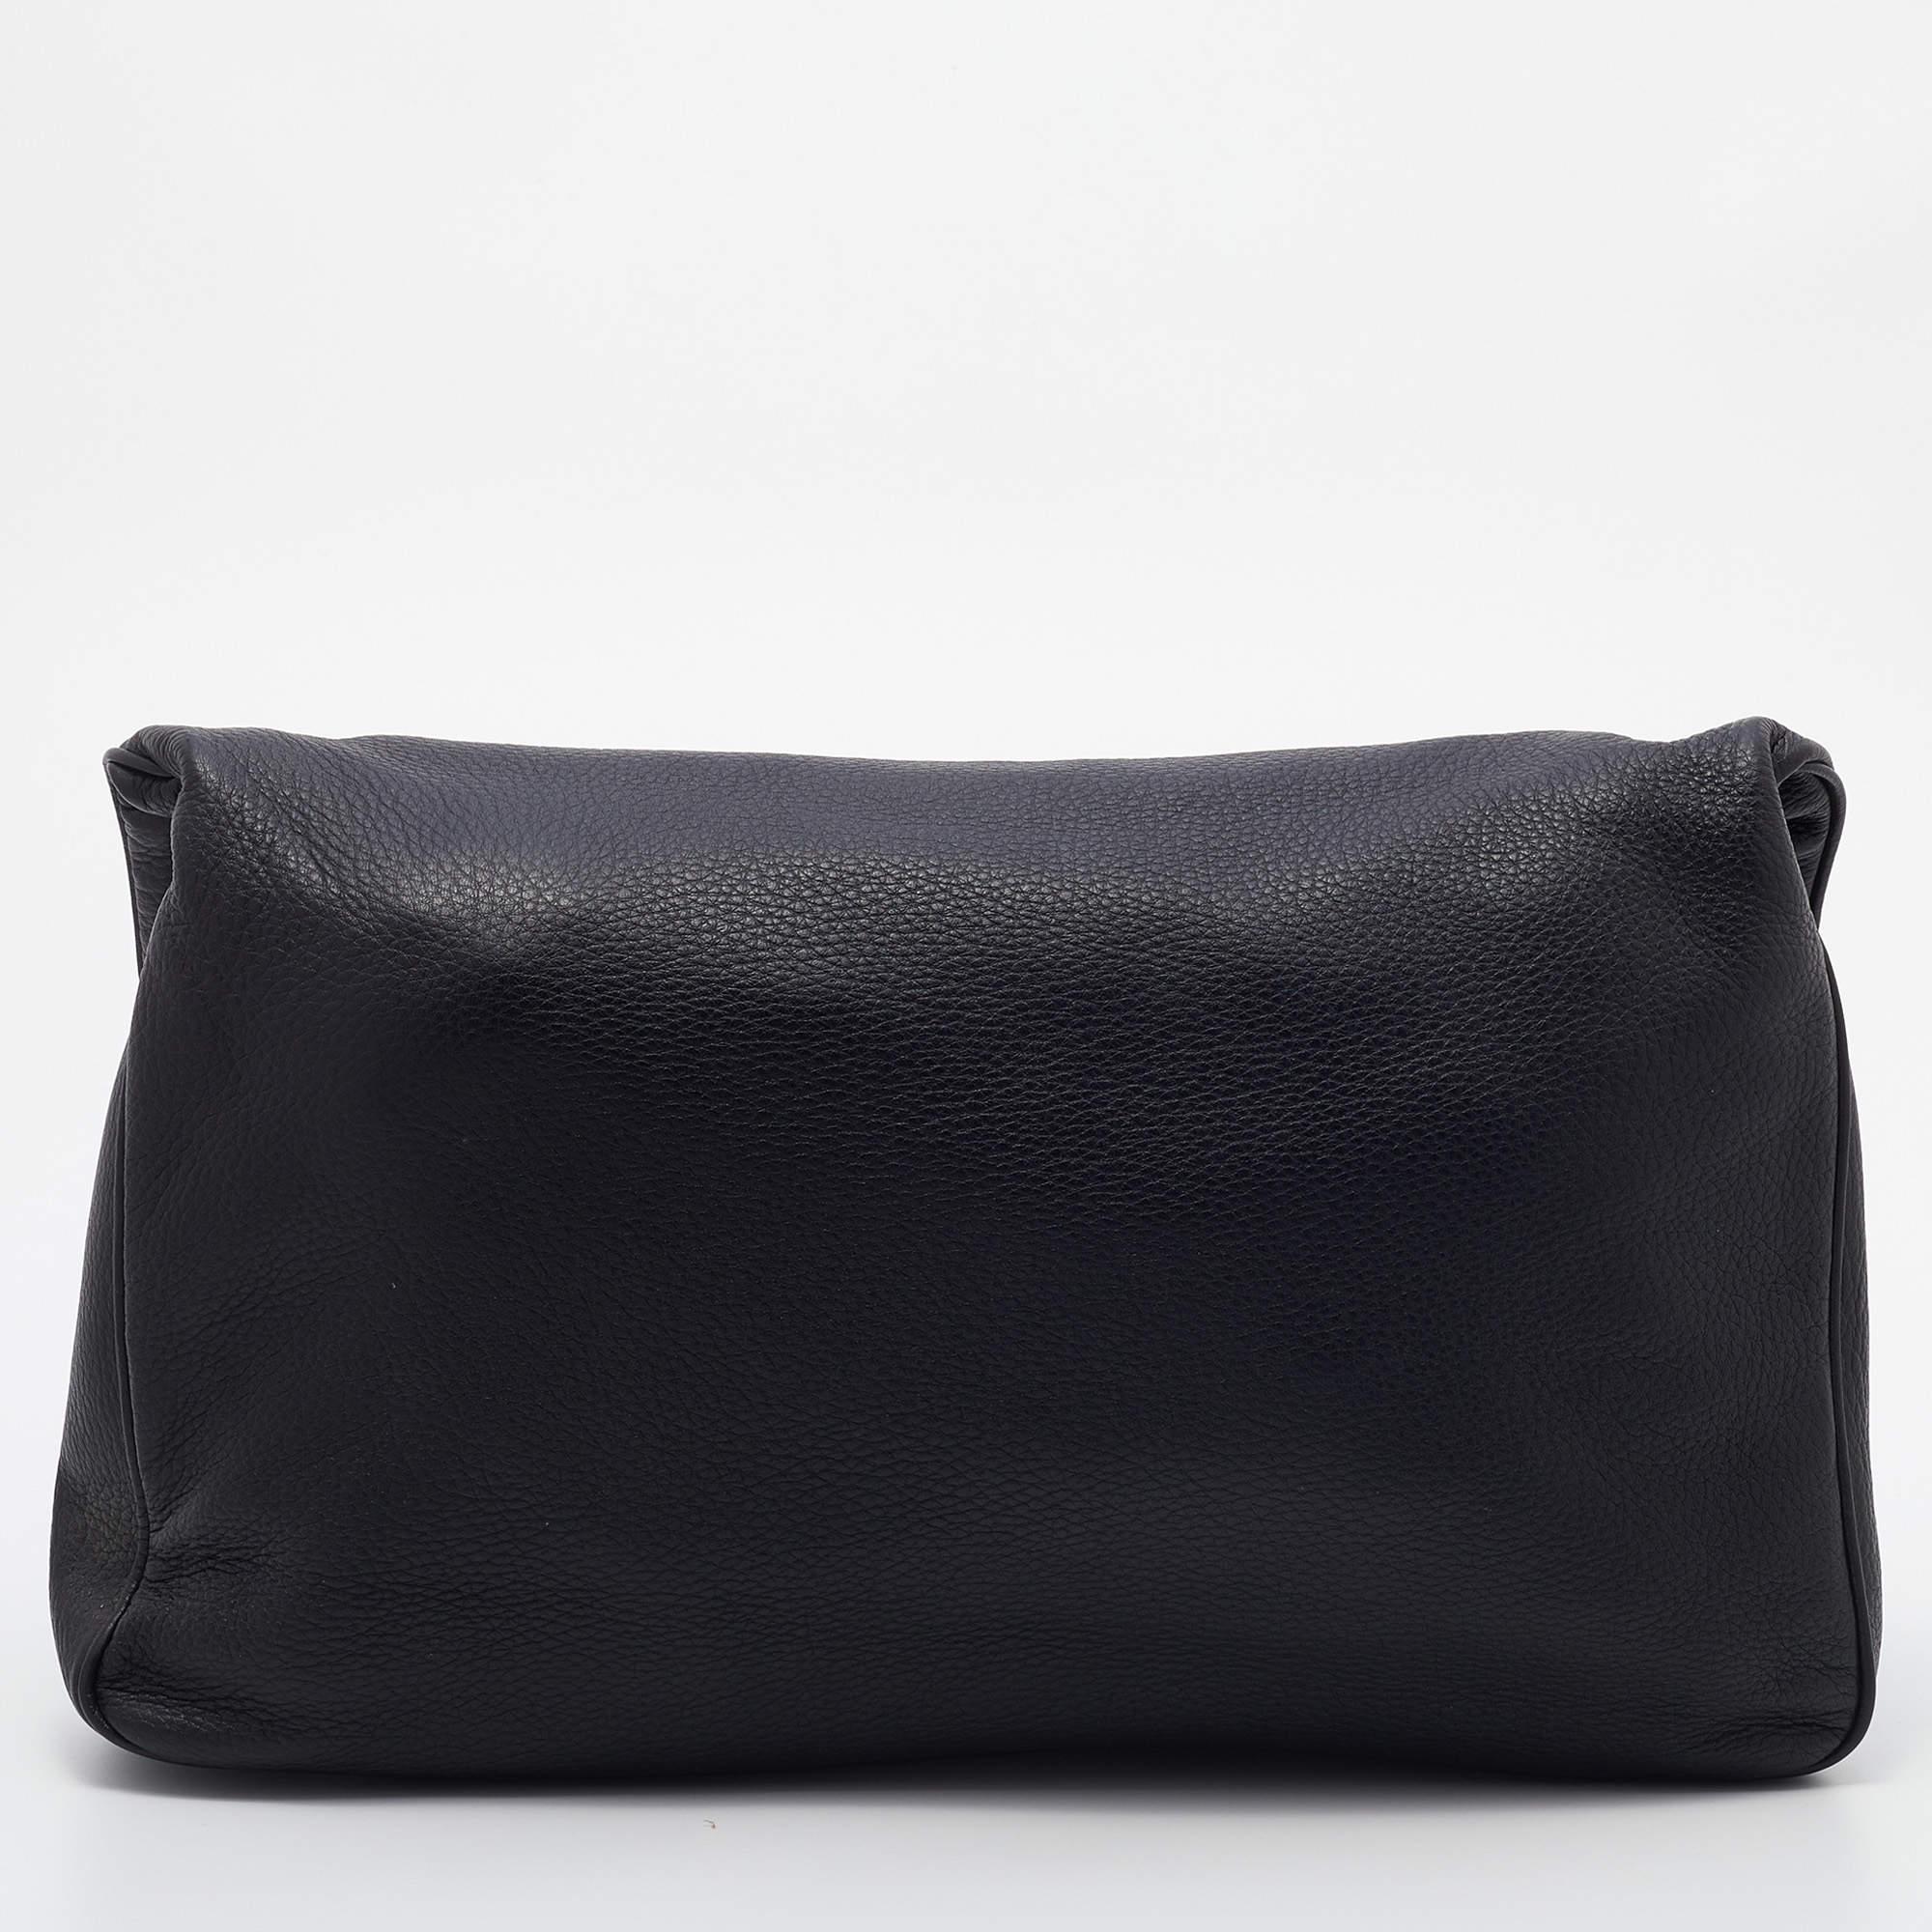 Functional and fashionable, this clutch is a classy styling choice. It is crafted from quality materials, and its lined interior will keep your evening essentials in a neat way.

